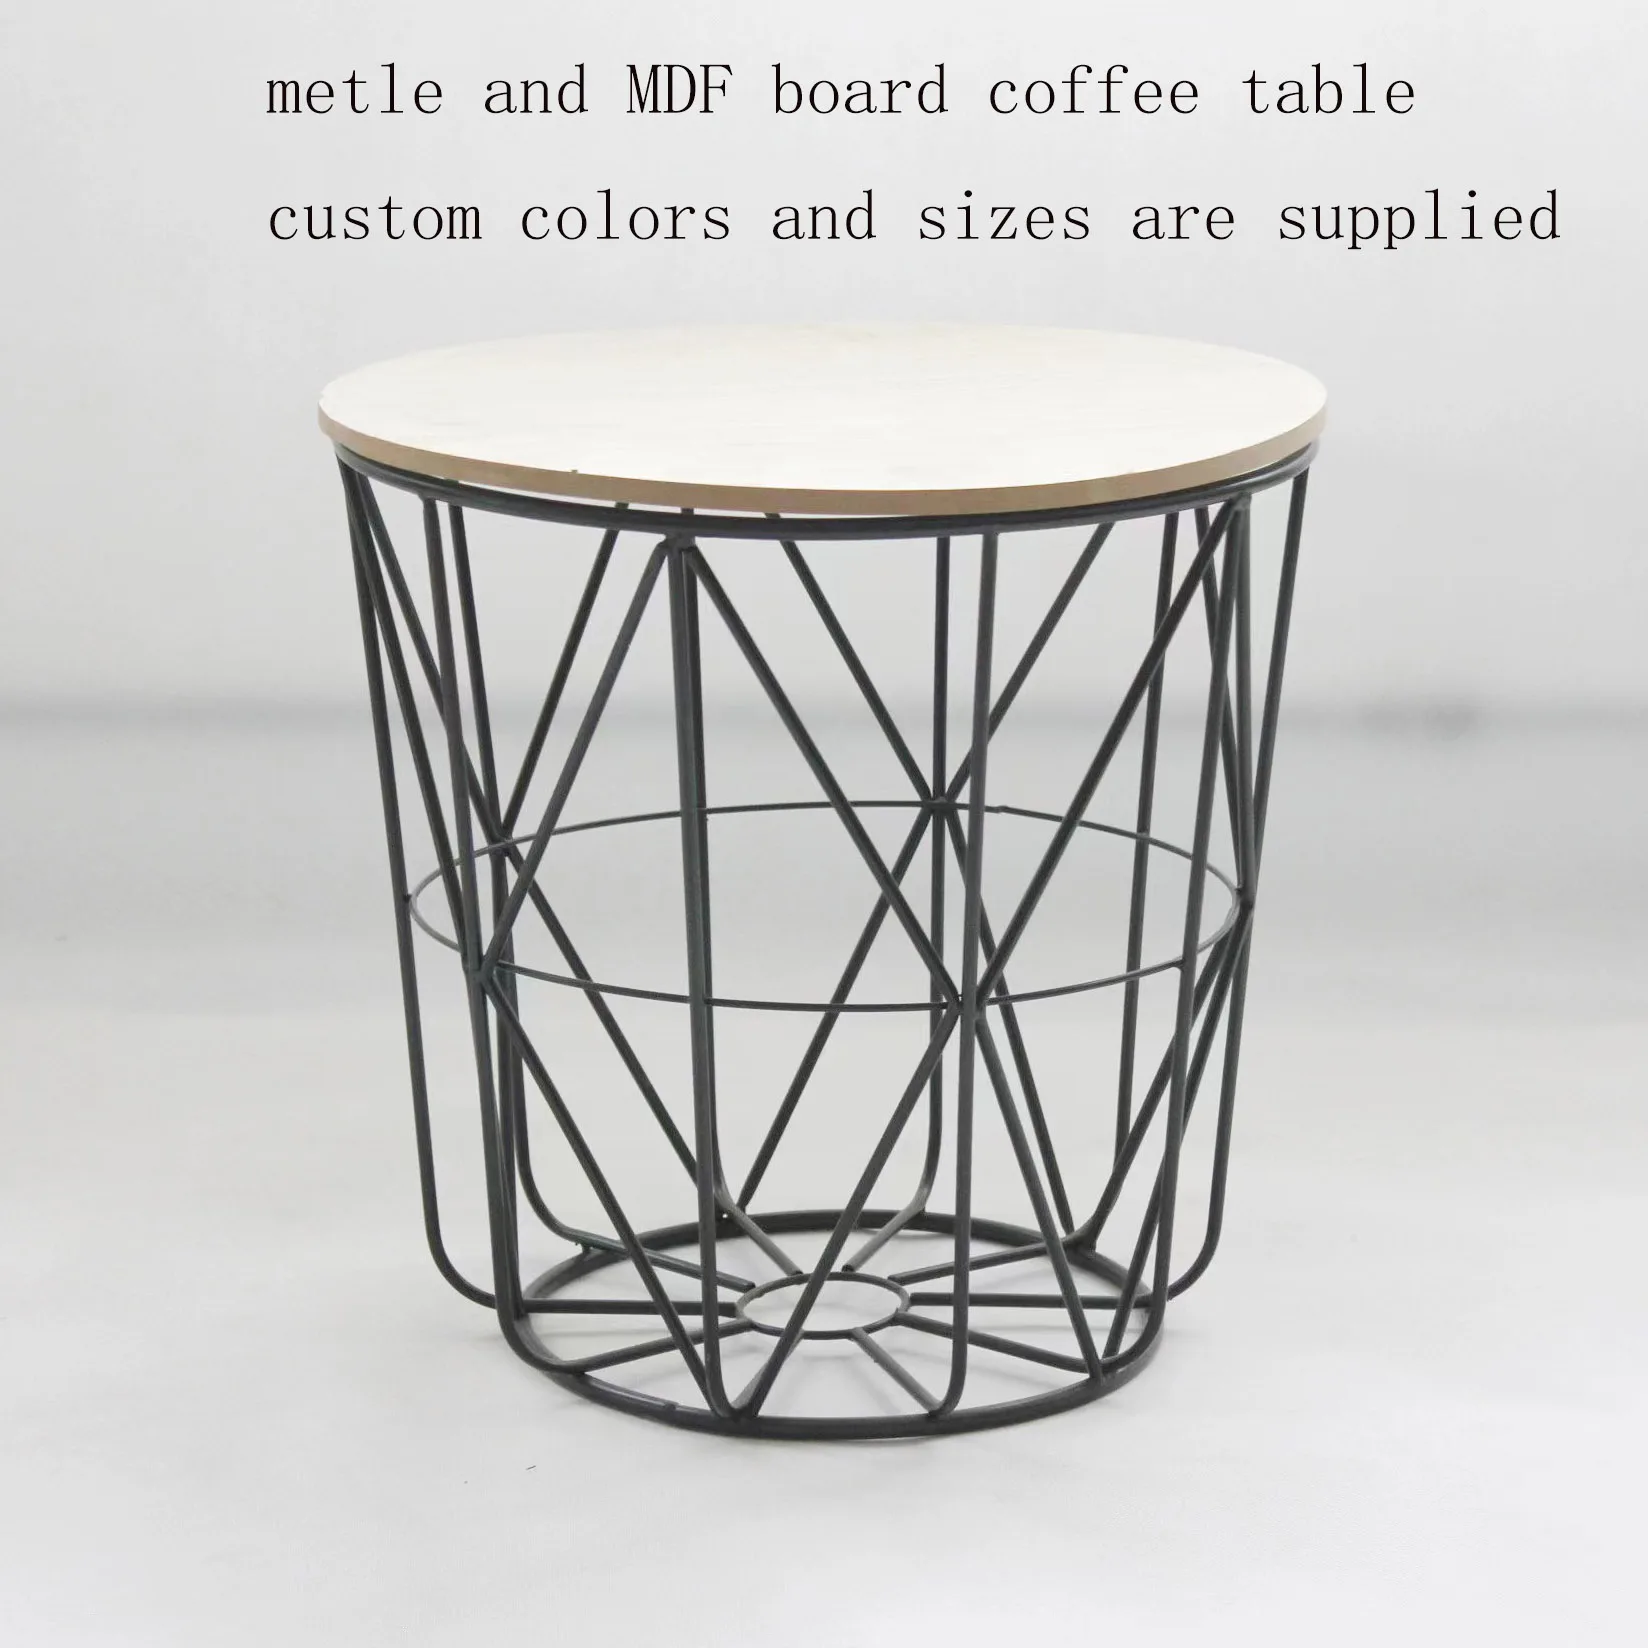 Fashionable hot metal and MDF board  coffee table for home or hotel custom colors and sizes